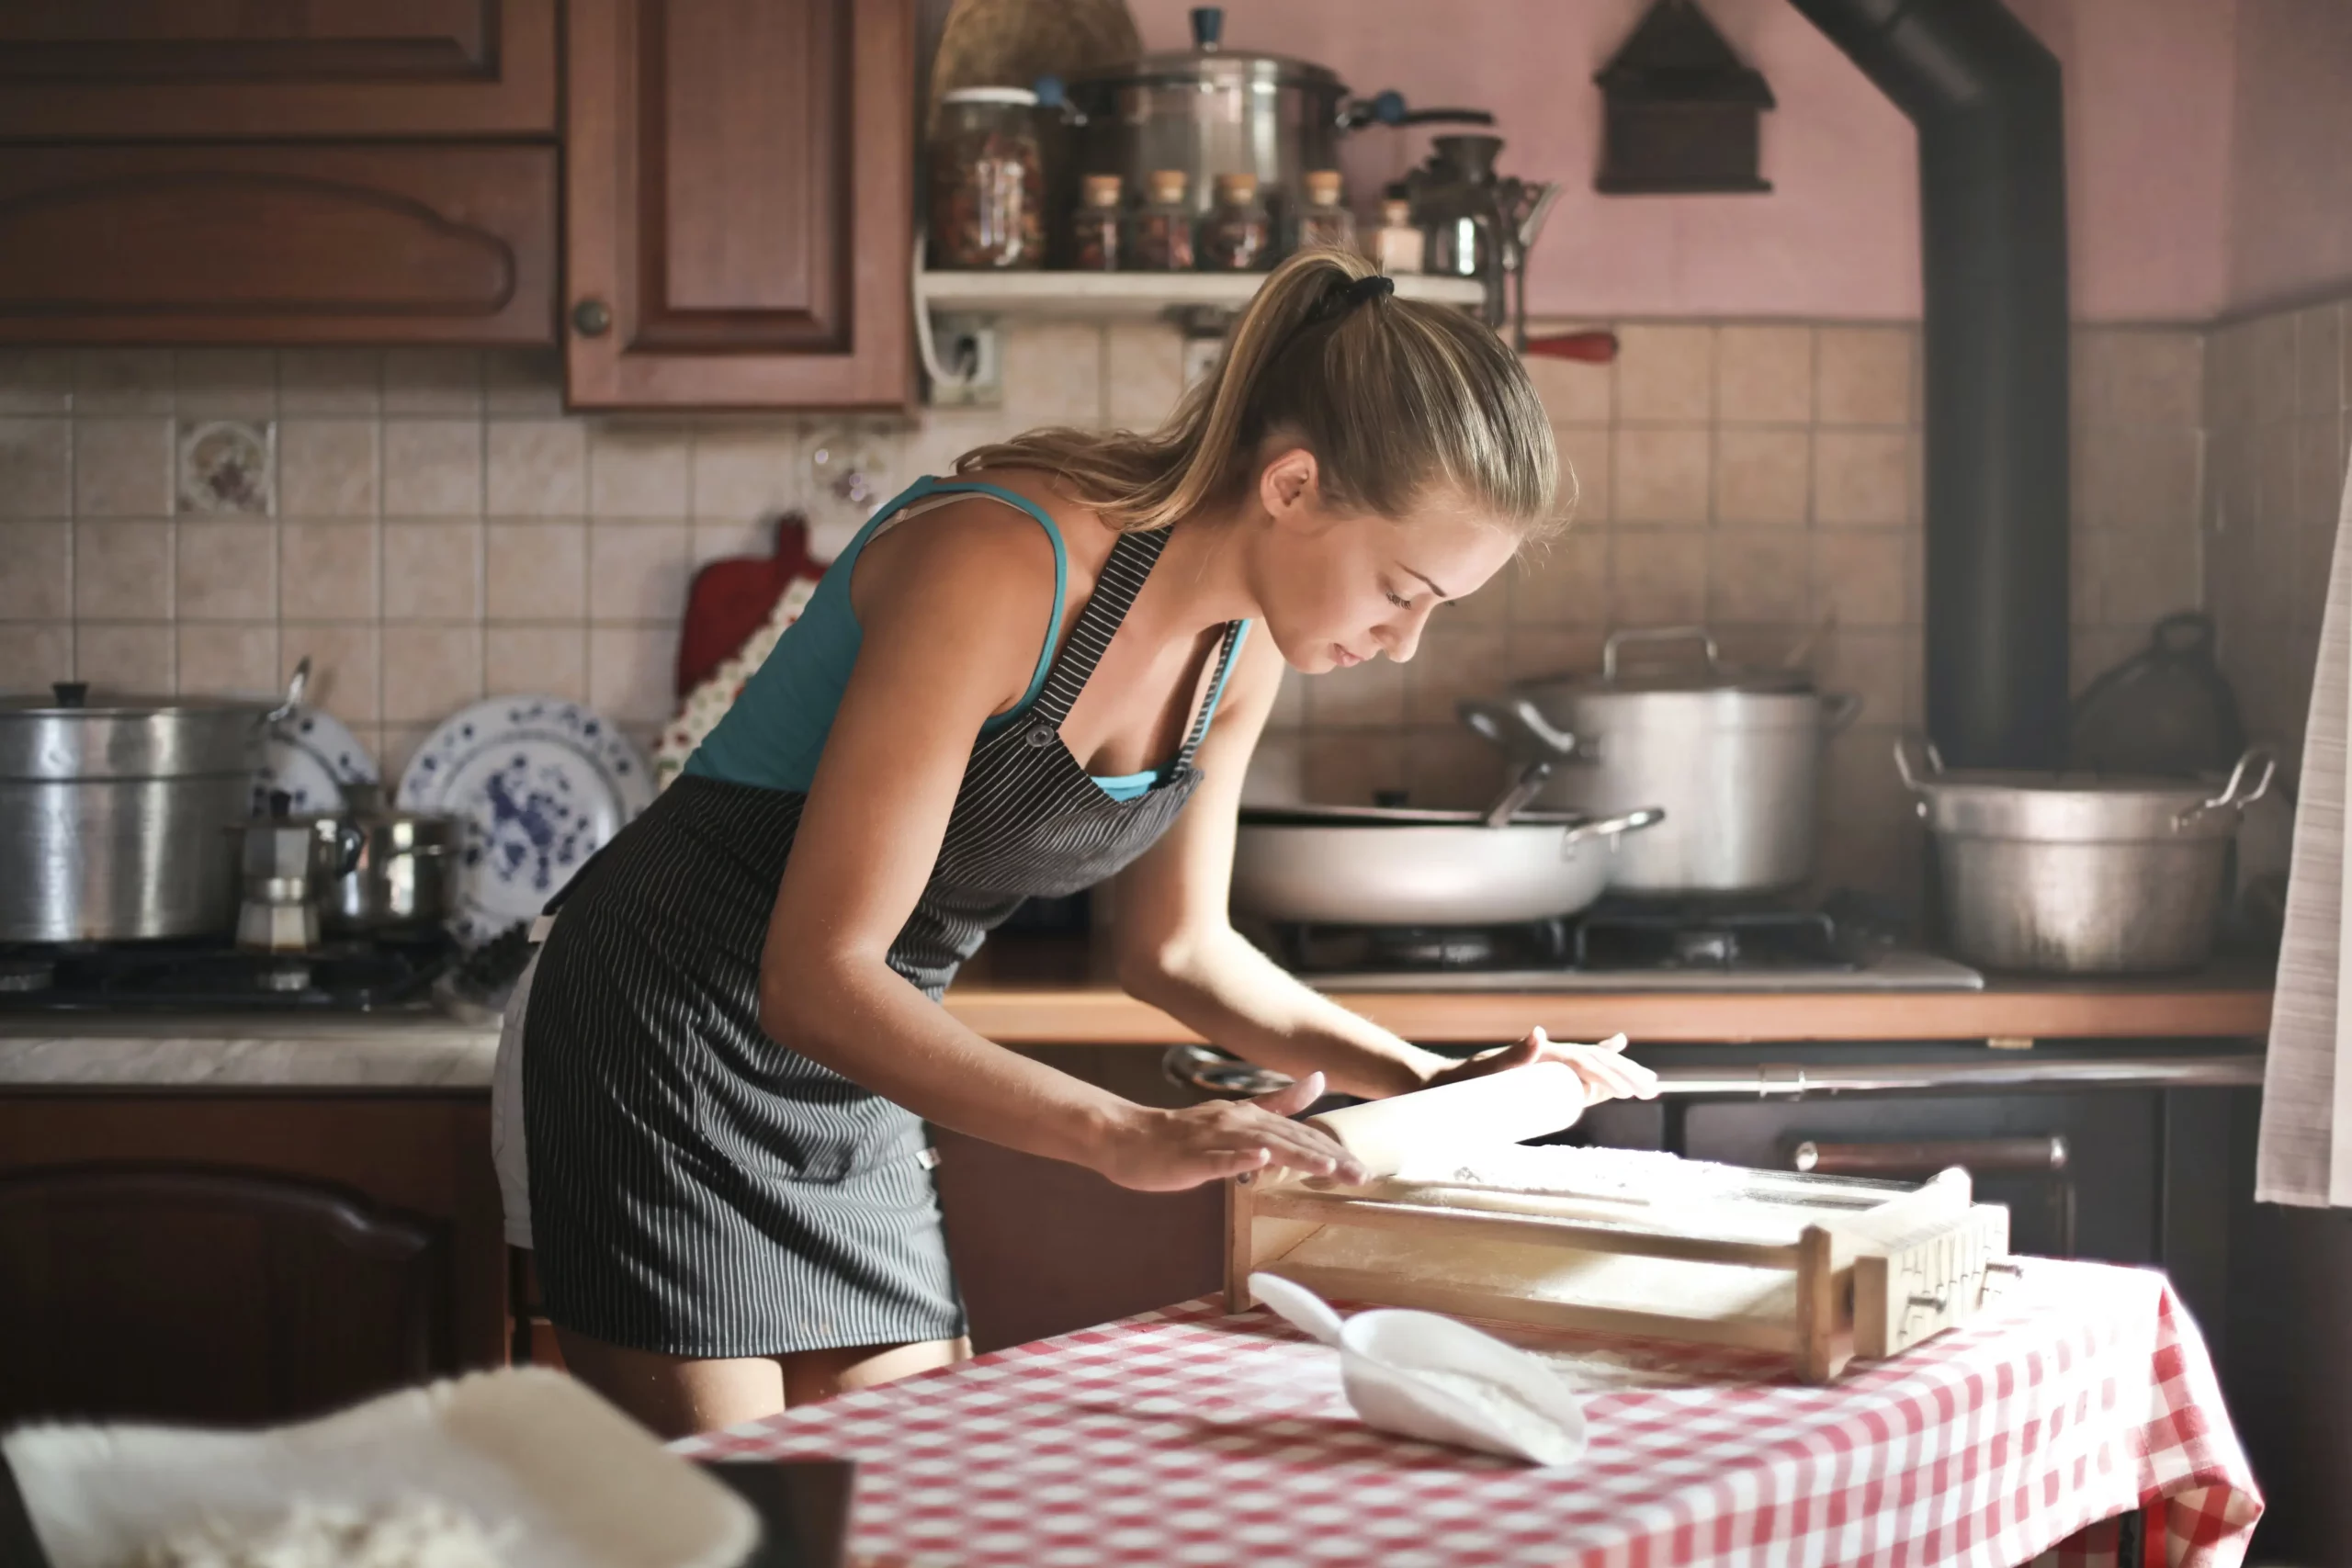 A woman engaged in zero-waste kitchen swaps, skillfully preparing a meal in her kitchen.